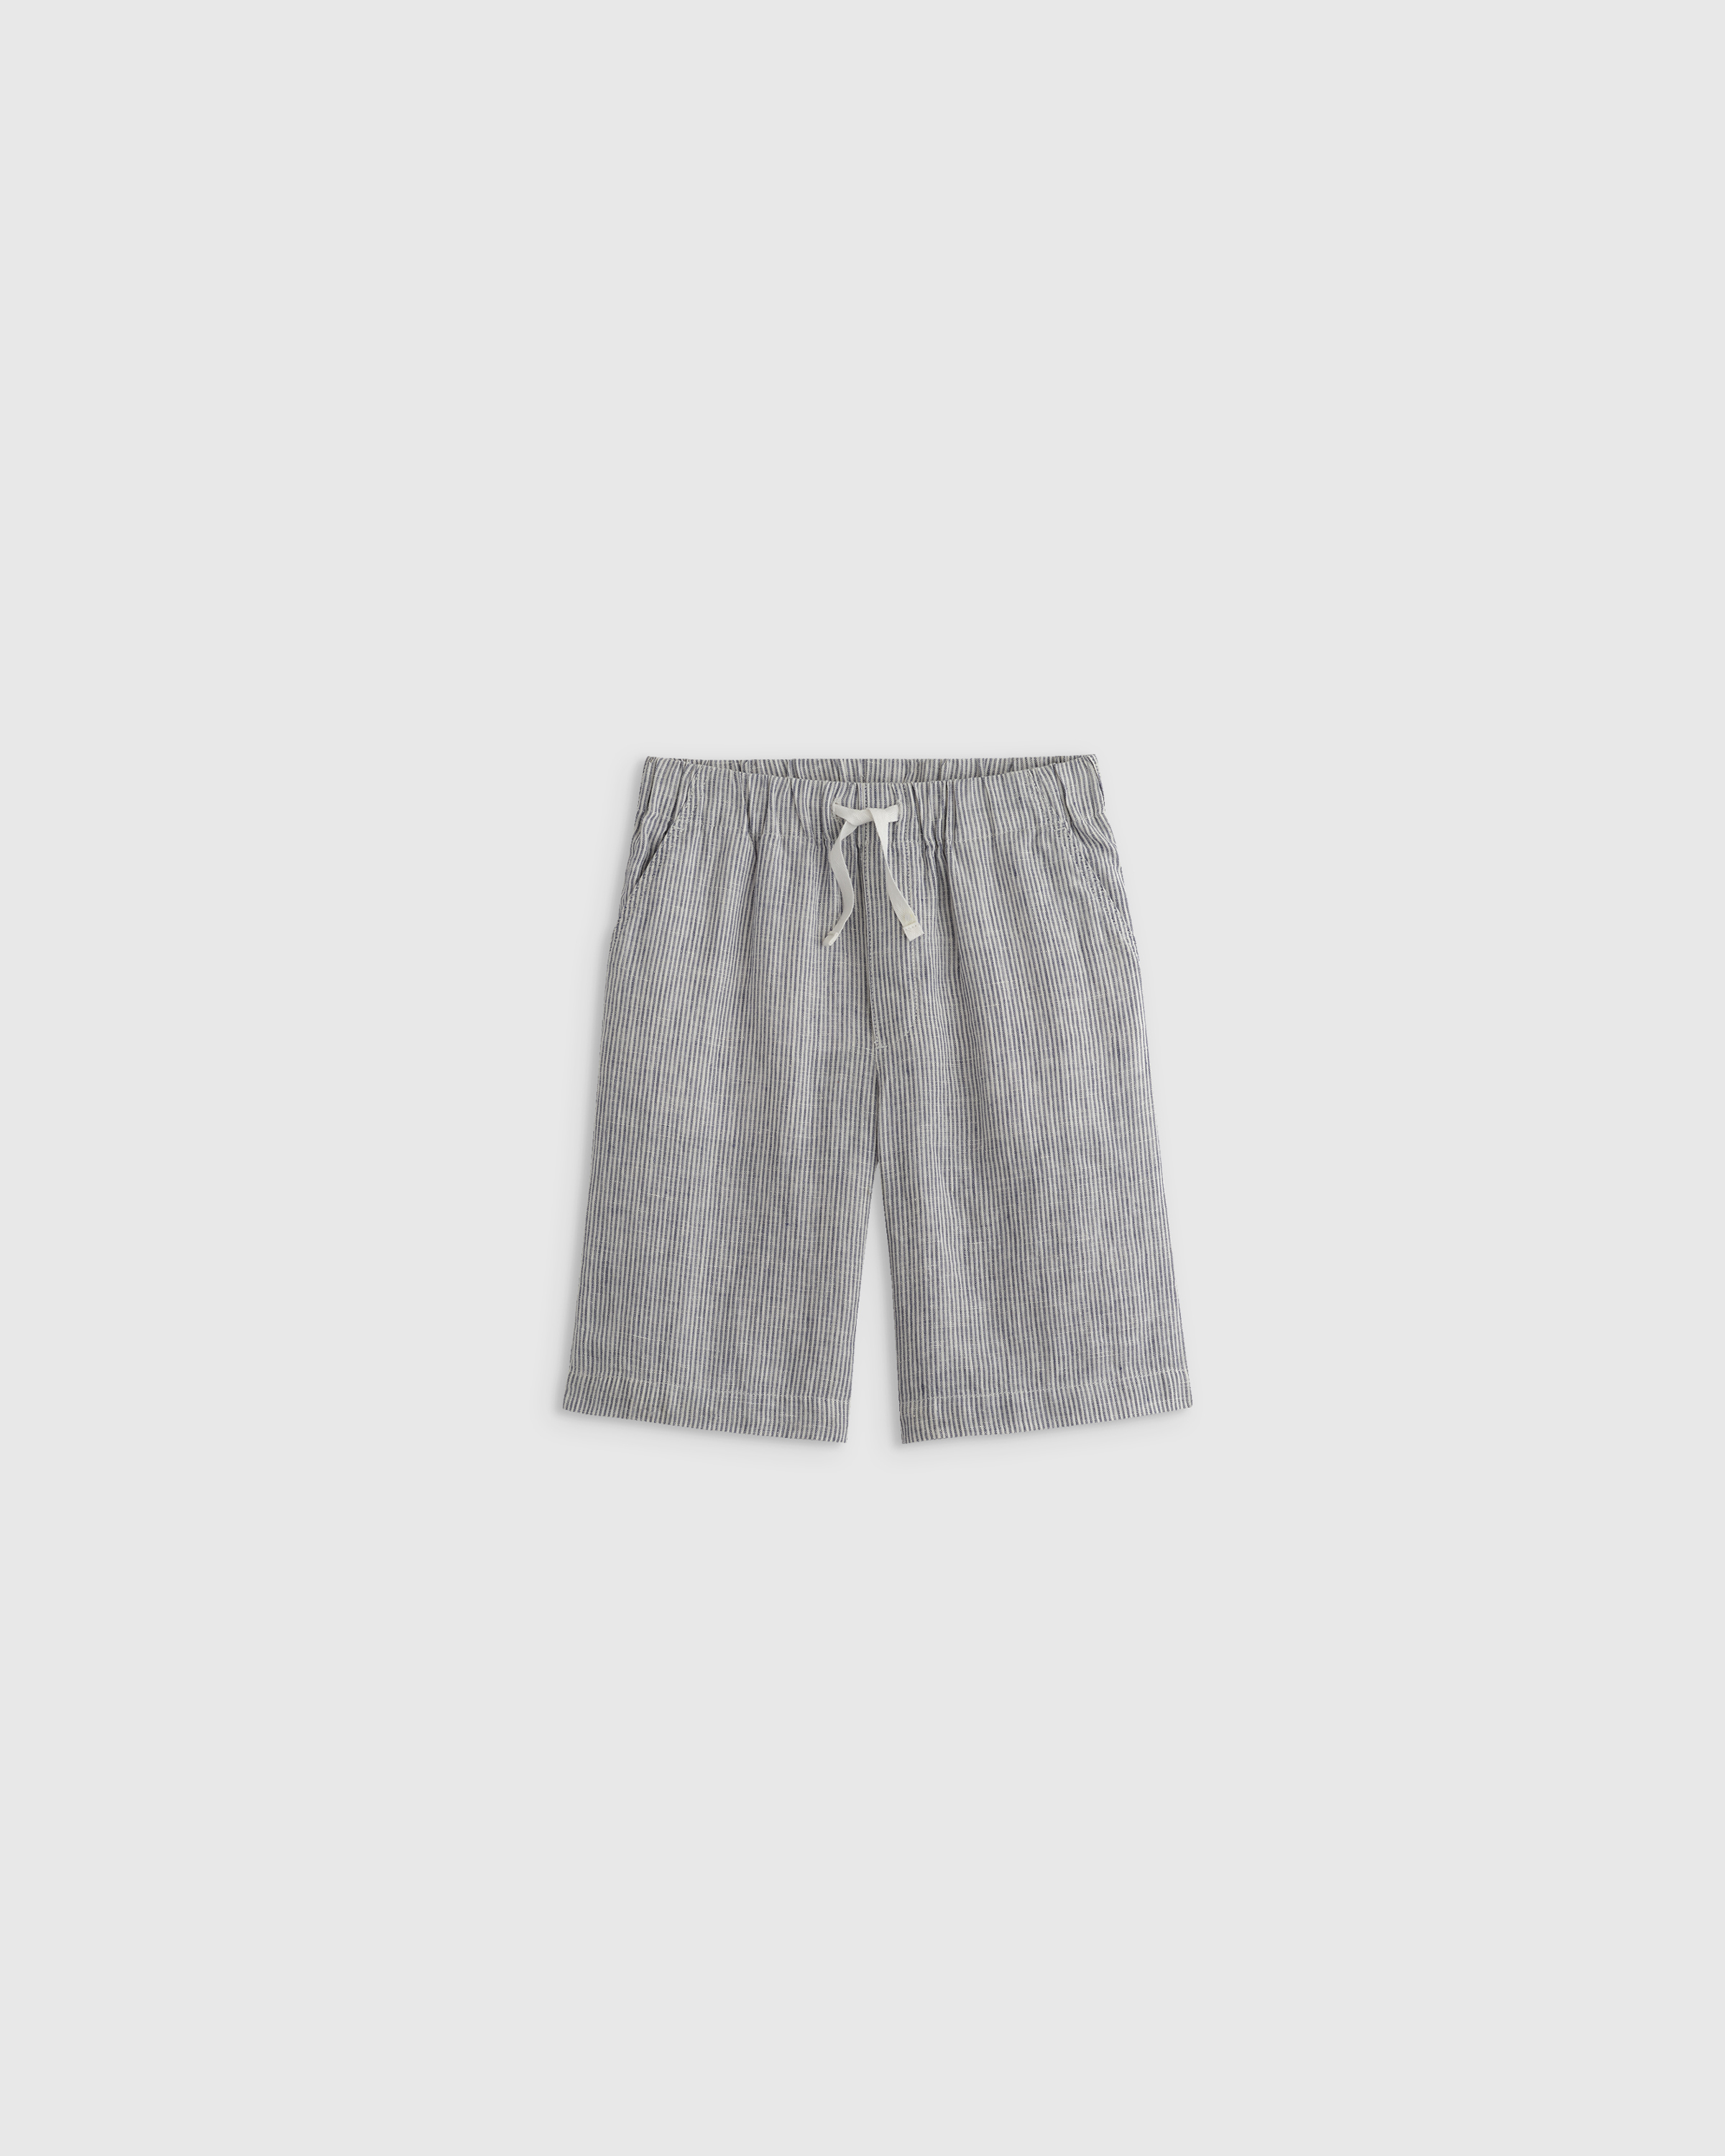 Quince 100% European Linen Pull-on Shorts In Blue Pinstripe